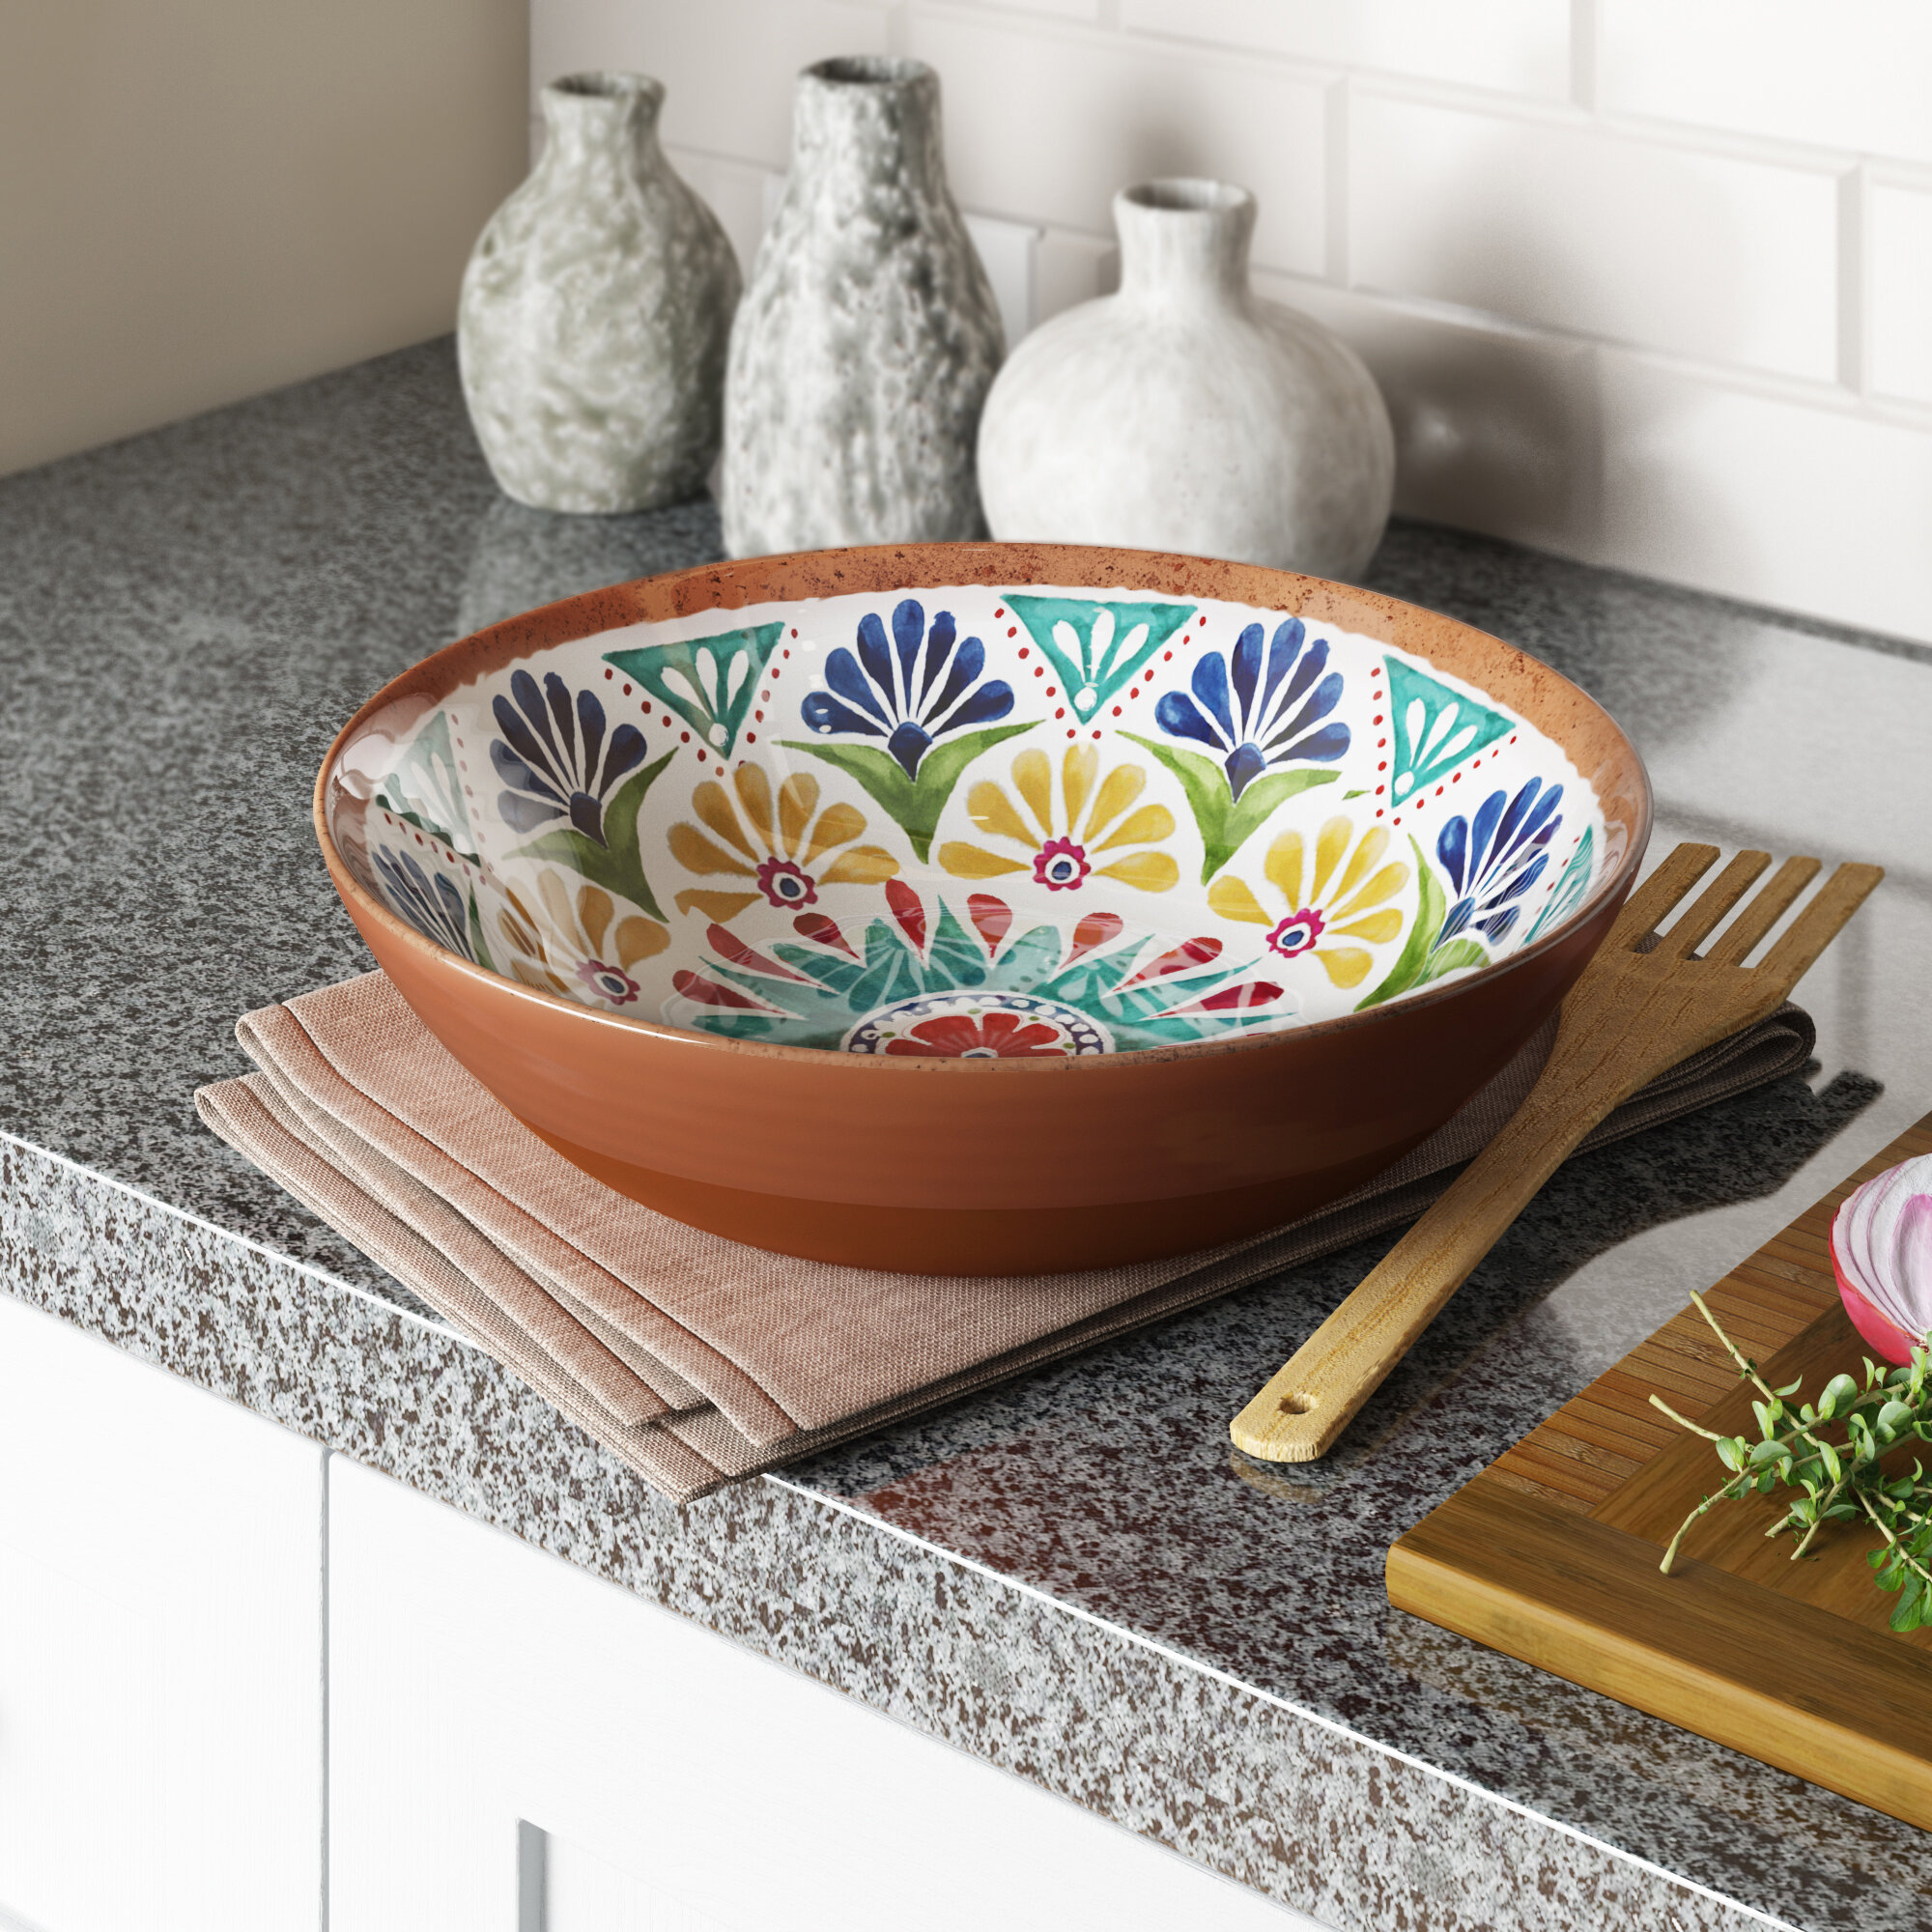 3 Expert Tips For Choosing A Serving Bowl - VisualHunt